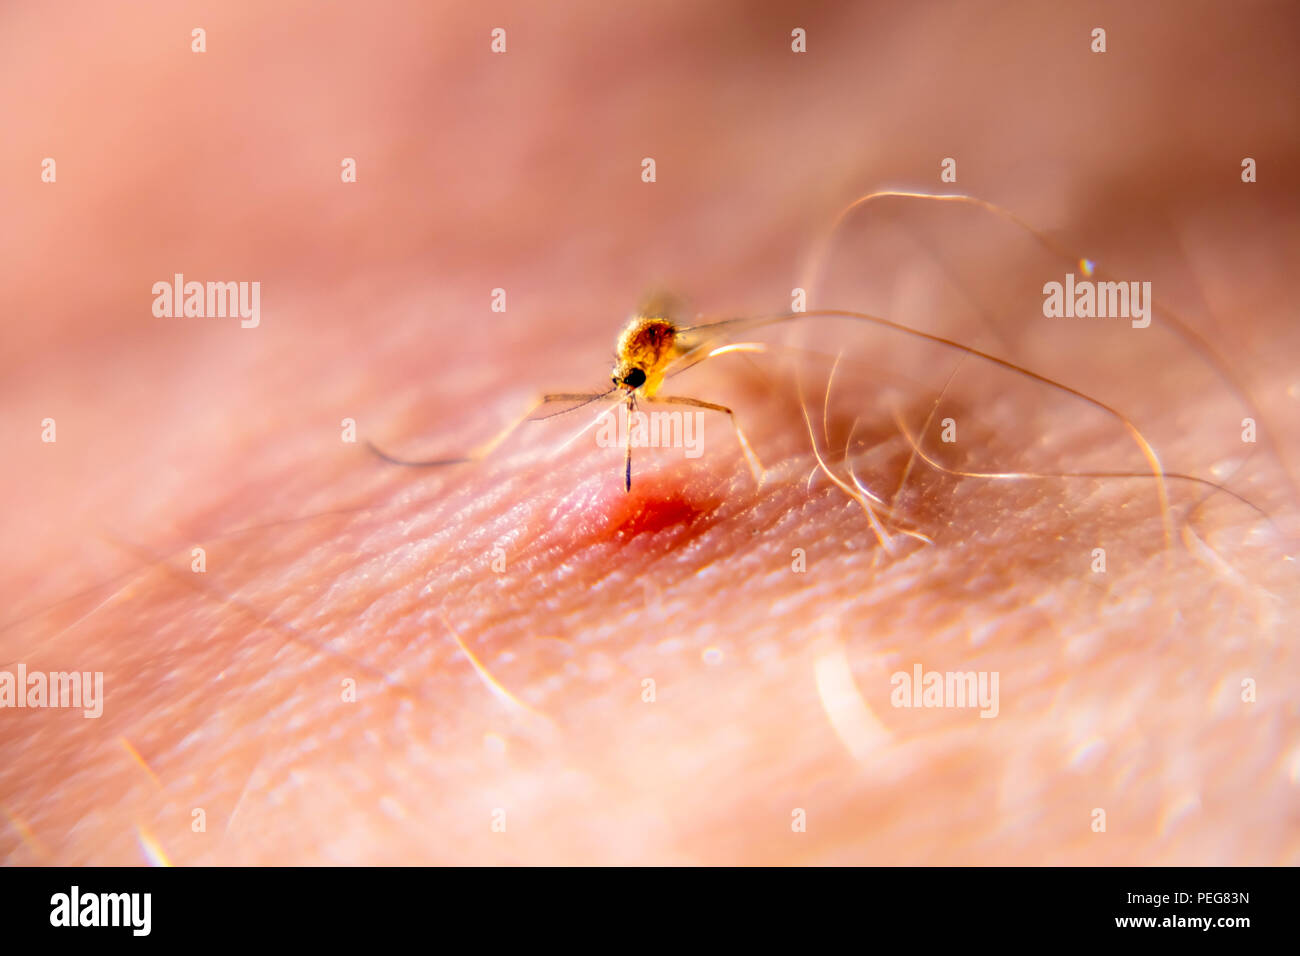 Close-up of mosquito sucking blood from human skin. Stock Photo